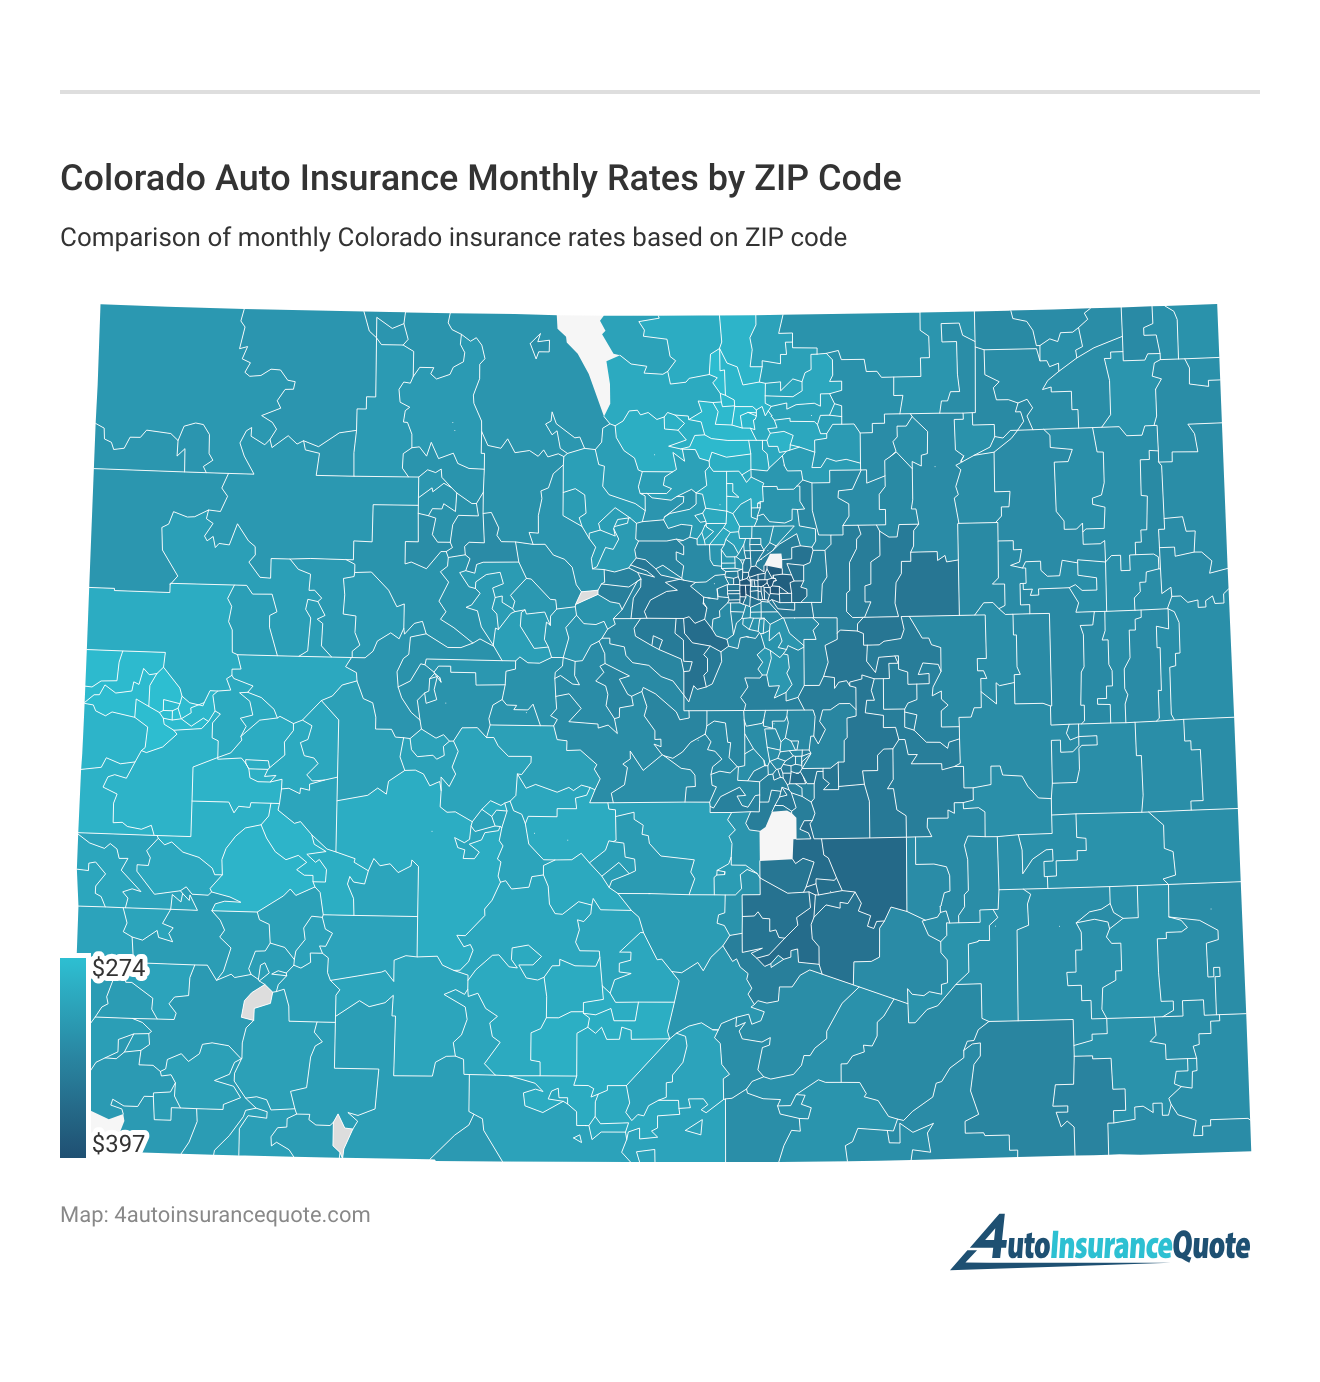 <h3>Colorado Auto Insurance Monthly Rates by ZIP Code</h3>